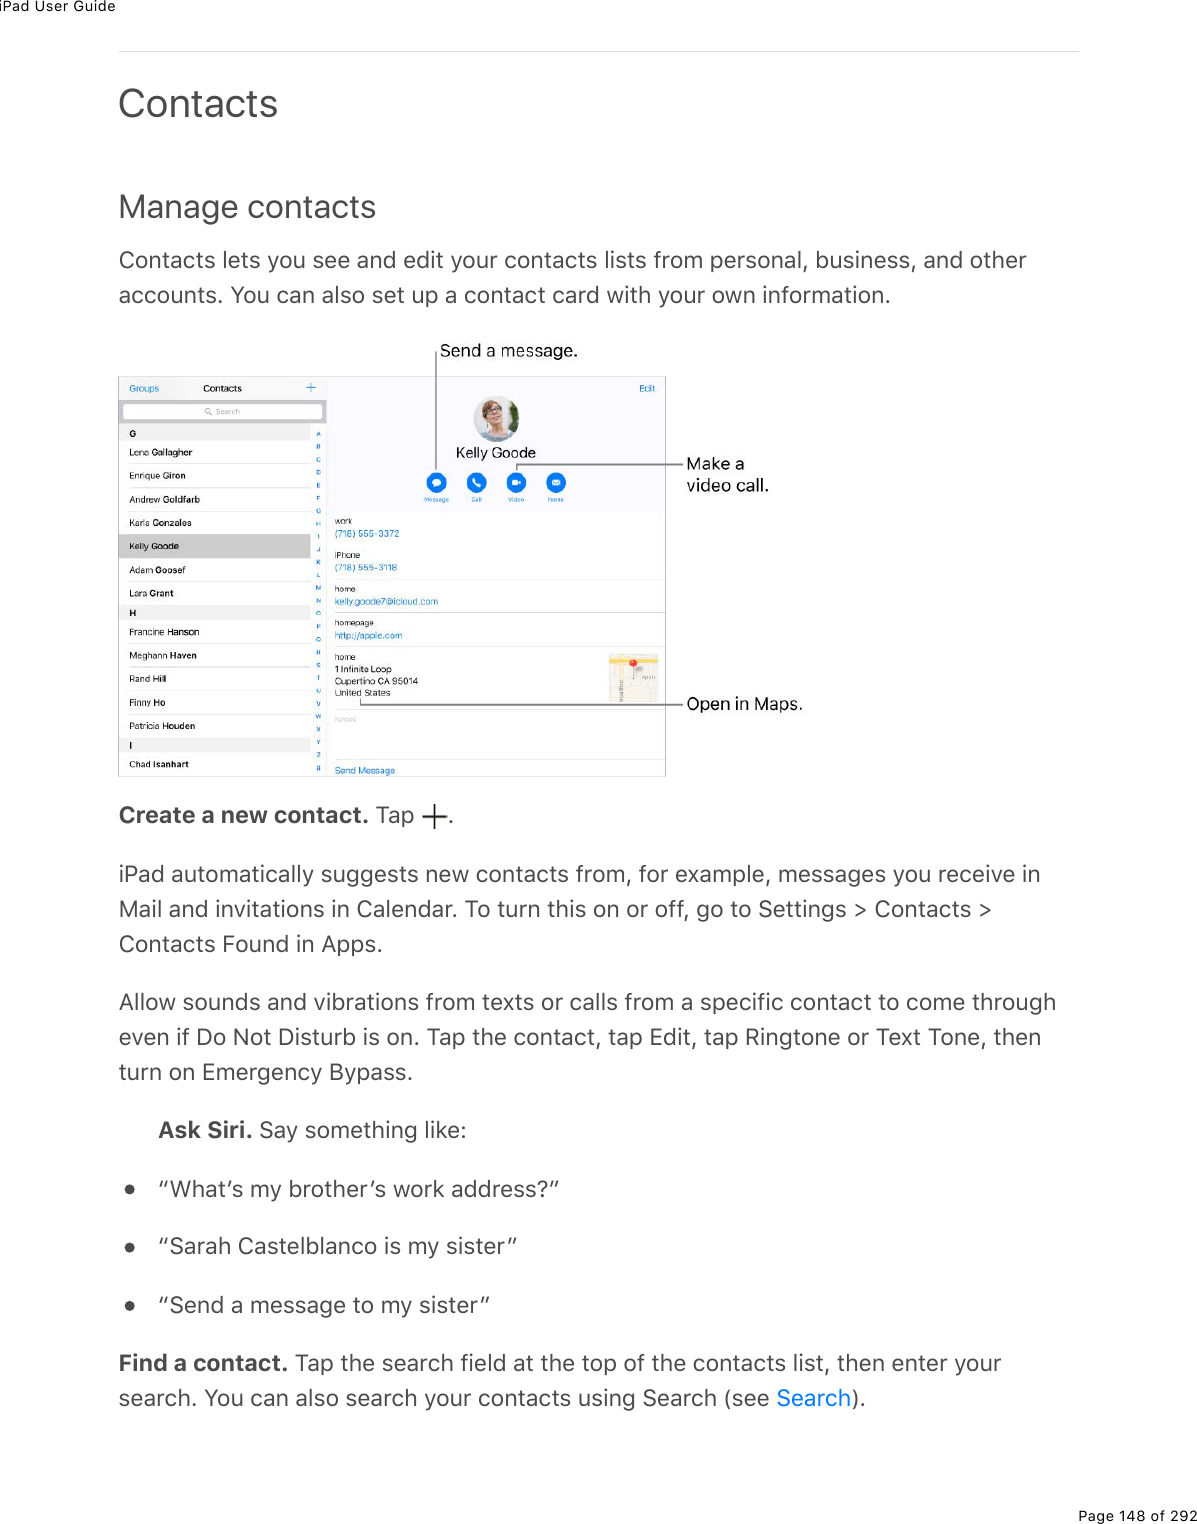 iPad User GuidePage 148 of 292ContactsManage contacts420&quot;#)&quot;&amp;%3(&quot;&amp;%=2&gt;%&amp;((%#07%(7.&quot;%=2&gt;$%)20&quot;#)&quot;&amp;%3.&amp;&quot;&amp;%9$2/%-($&amp;20#3L%5&gt;&amp;.0(&amp;&amp;L%#07%2&quot;*($#))2&gt;0&quot;&amp;E%Y2&gt;%)#0%#3&amp;2%&amp;(&quot;%&gt;-%#%)20&quot;#)&quot;%)#$7%1.&quot;*%=2&gt;$%210%.092$/#&quot;.20ECreate a new contact. M#-% E.@#7%#&gt;&quot;2/#&quot;.)#33=%&amp;&gt;;;(&amp;&quot;&amp;%0(1%)20&quot;#)&quot;&amp;%9$2/L%92$%(,#/-3(L%/(&amp;&amp;#;(&amp;%=2&gt;%$()(.D(%.08#.3%#07%.0D.&quot;#&quot;.20&amp;%.0%4#3(07#$E%M2%&quot;&gt;$0%&quot;*.&amp;%20%2$%299L%;2%&quot;2%!(&quot;&quot;.0;&amp;%[%420&quot;#)&quot;&amp;%[420&quot;#)&quot;&amp;%B2&gt;07%.0%?--&amp;E?3321%&amp;2&gt;07&amp;%#07%D.5$#&quot;.20&amp;%9$2/%&quot;(,&quot;&amp;%2$%)#33&amp;%9$2/%#%&amp;-().9.)%)20&quot;#)&quot;%&quot;2%)2/(%&quot;*$2&gt;;*(D(0%.9%P2%C2&quot;%P.&amp;&quot;&gt;$5%.&amp;%20E%M#-%&quot;*(%)20&quot;#)&quot;L%&quot;#-%+7.&quot;L%&quot;#-%:.0;&quot;20(%2$%M(,&quot;%M20(L%&quot;*(0&quot;&gt;$0%20%+/($;(0)=%J=-#&amp;&amp;EAsk Siri. !#=%&amp;2/(&quot;*.0;%3.&apos;(Ob&lt;*#&quot;F&amp;%/=%5$2&quot;*($F&amp;%12$&apos;%#77$(&amp;&amp;ocb!#$#*%4#&amp;&quot;(353#0)2%.&amp;%/=%&amp;.&amp;&quot;($cb!(07%#%/(&amp;&amp;#;(%&quot;2%/=%&amp;.&amp;&quot;($cFind a contact. M#-%&quot;*(%&amp;(#$)*%9.(37%#&quot;%&quot;*(%&quot;2-%29%&quot;*(%)20&quot;#)&quot;&amp;%3.&amp;&quot;L%&quot;*(0%(0&quot;($%=2&gt;$&amp;(#$)*E%Y2&gt;%)#0%#3&amp;2%&amp;(#$)*%=2&gt;$%)20&quot;#)&quot;&amp;%&gt;&amp;.0;%!(#$)*%W&amp;((% XE!(#$)*